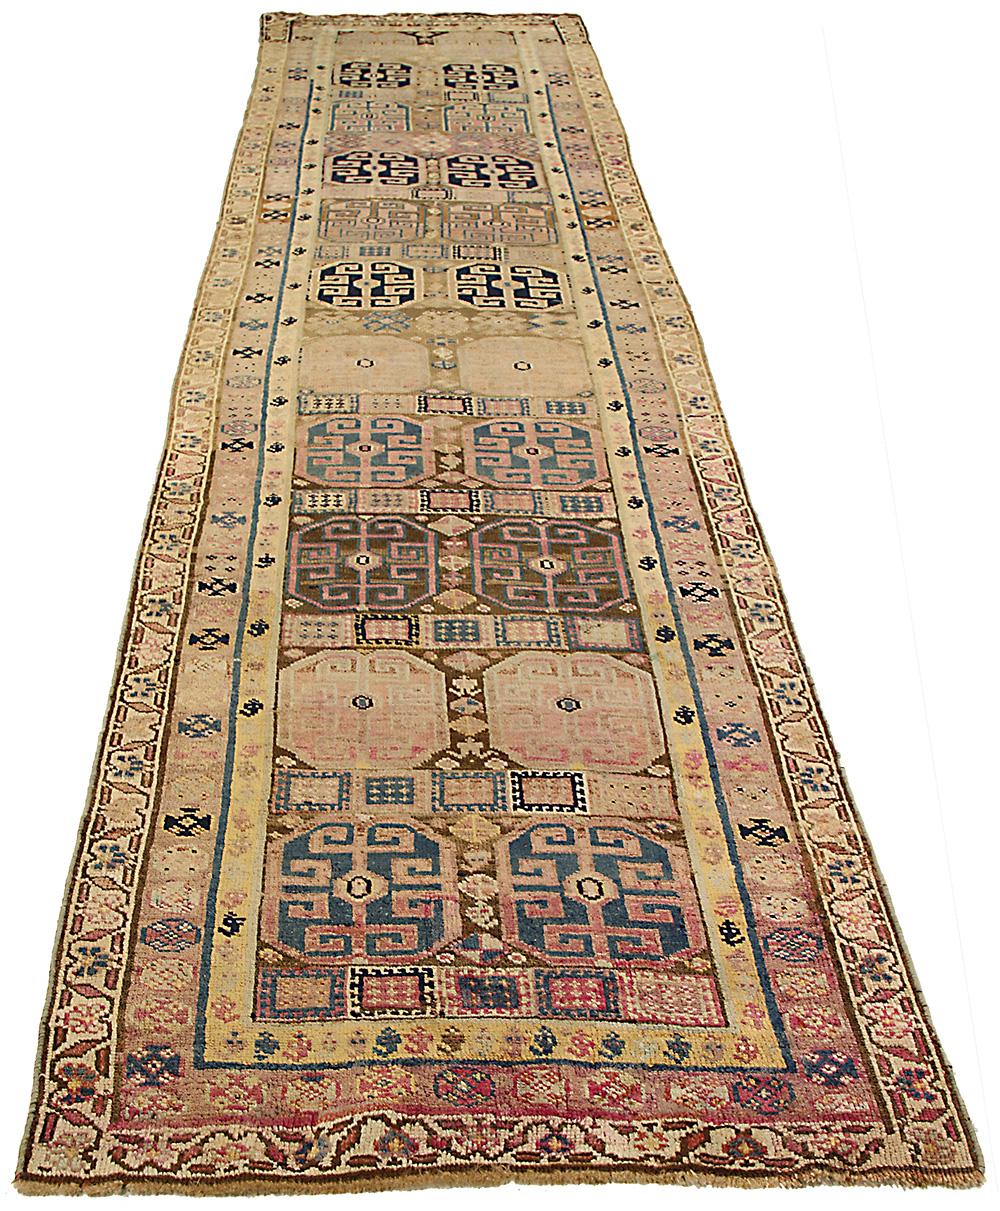 This antique Persian runner rug is a masterpiece of craftsmanship, handwoven from the finest sheep’s wool and colored with all-natural vegetable dyes that are safe for humans and pets. Featuring a traditional Bijar design with geometric and